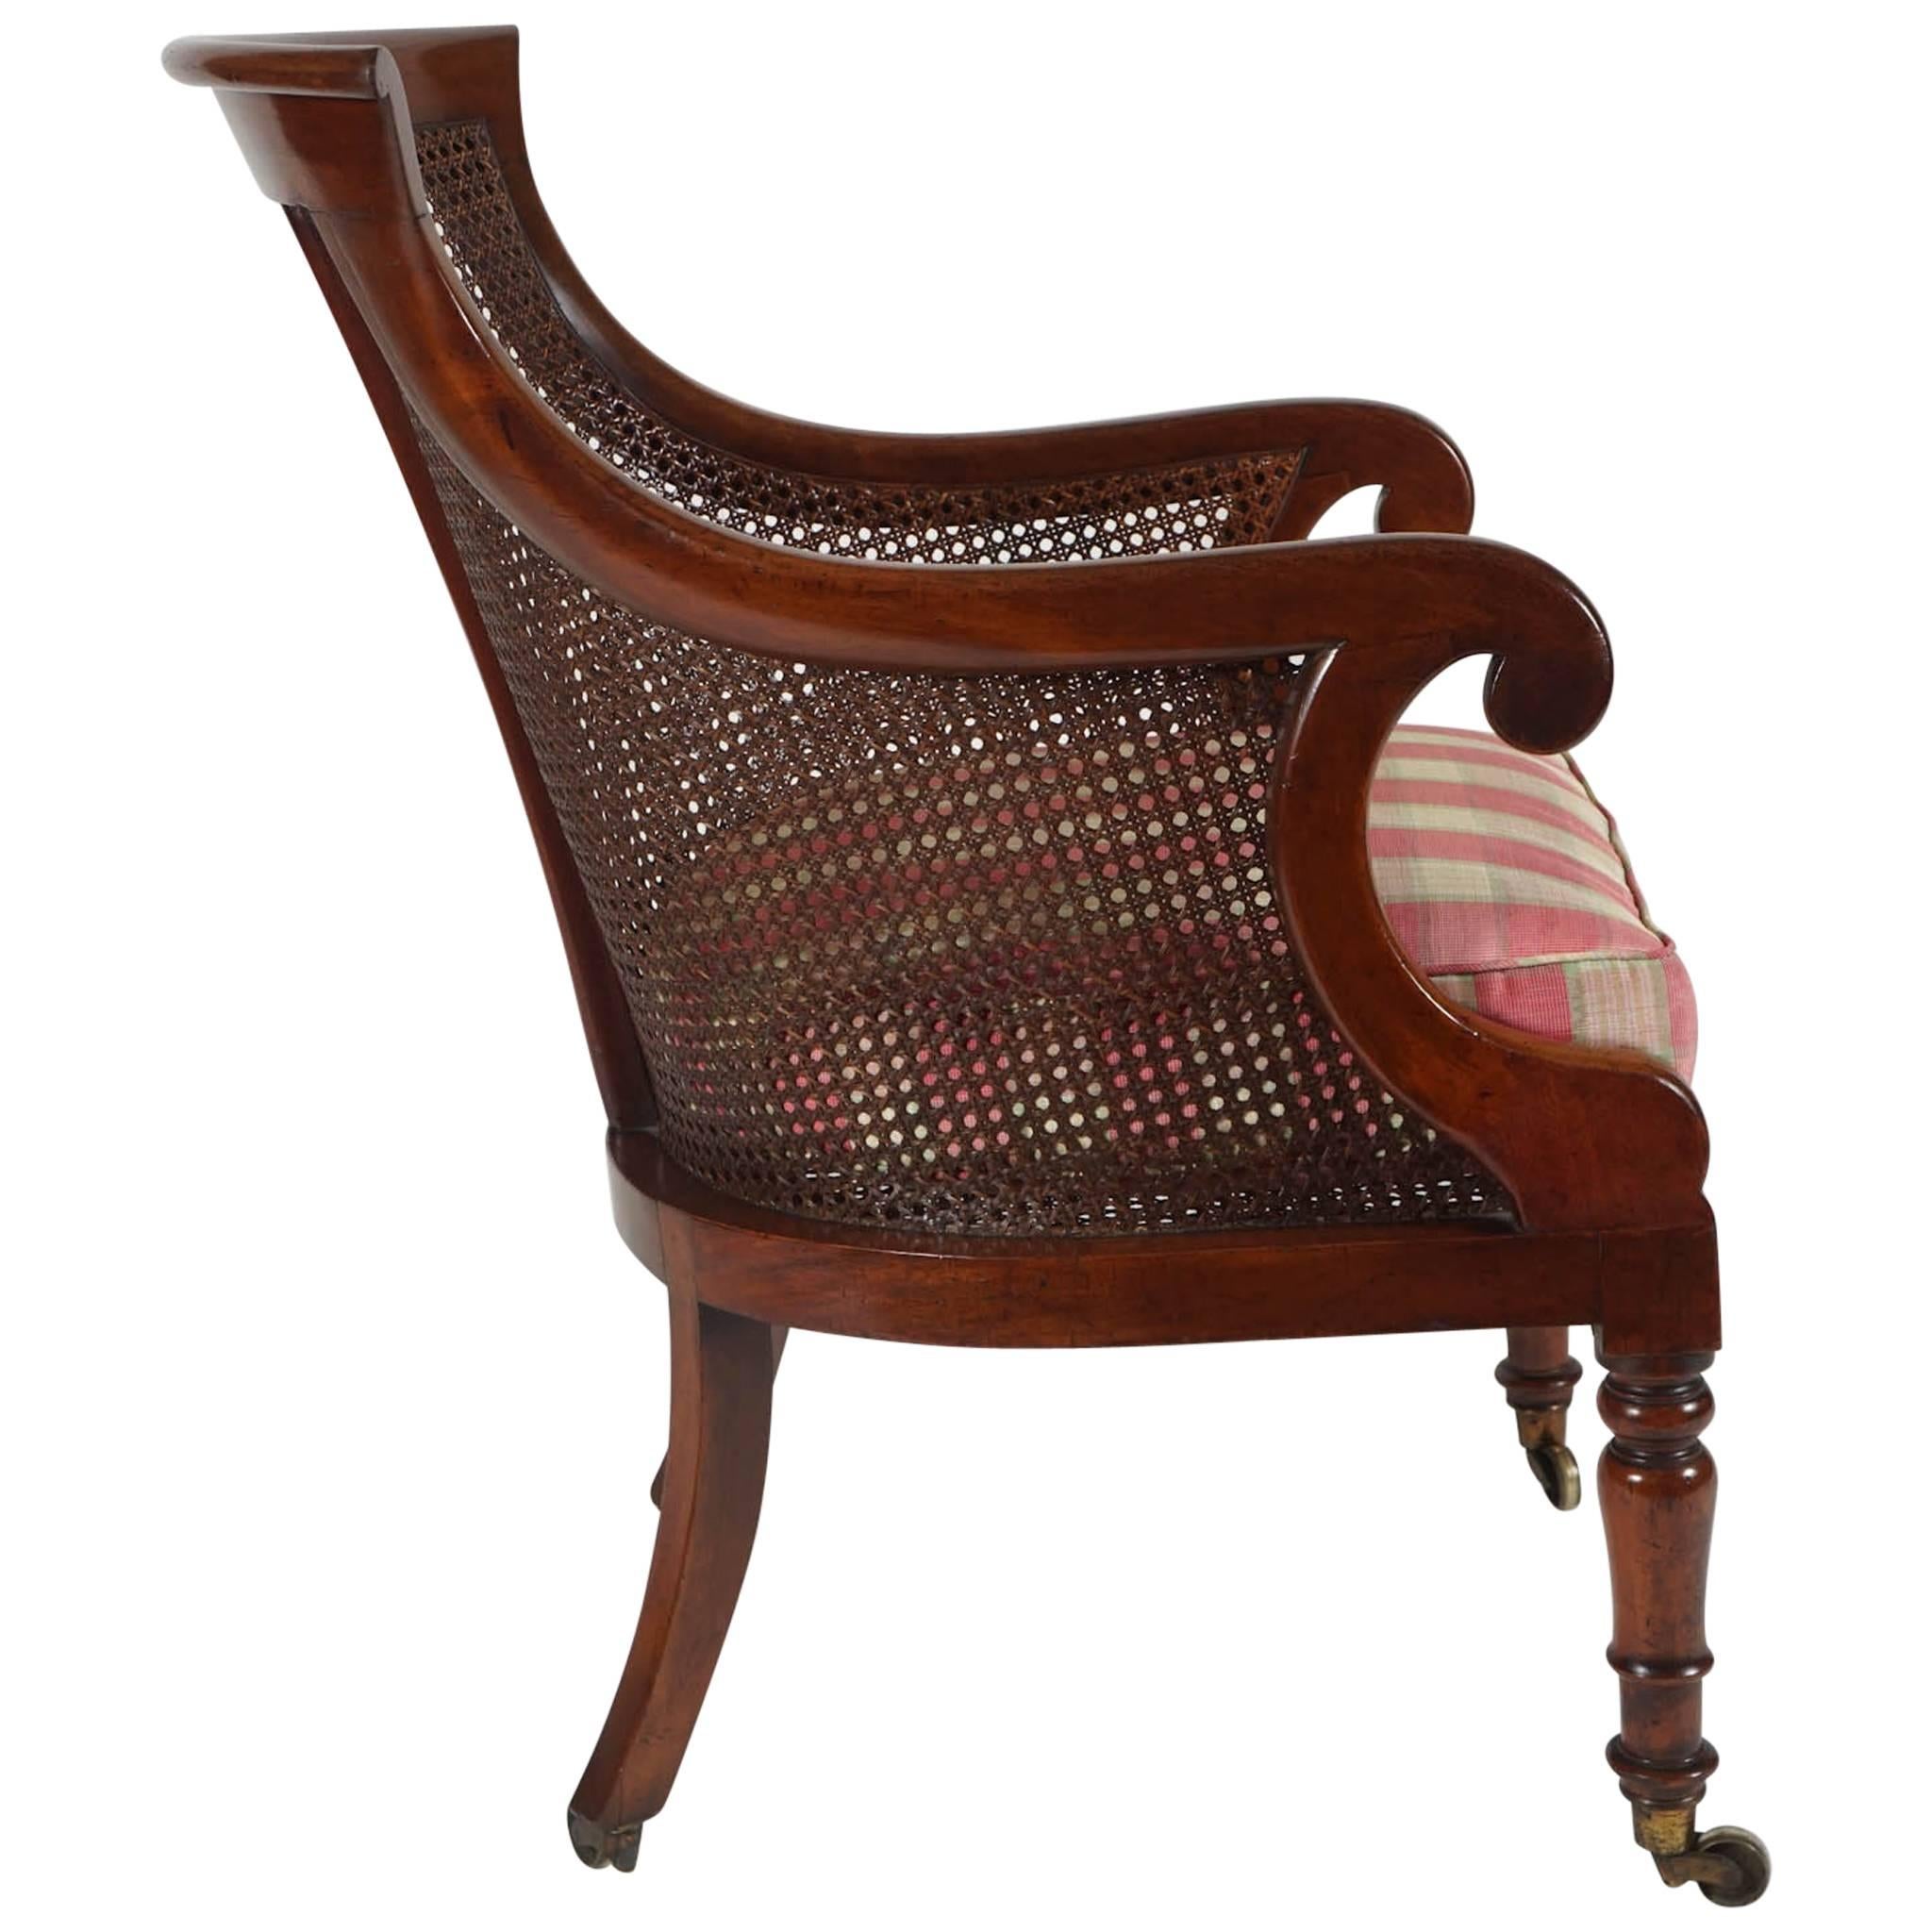 An elegant English Regency period, circa 1830, armchair, library chair, or bergere of solid mahogany construction having shaped crest rail and scroll arms with caned back, sides, and seat with loose squab cushion on turned front legs and splayed